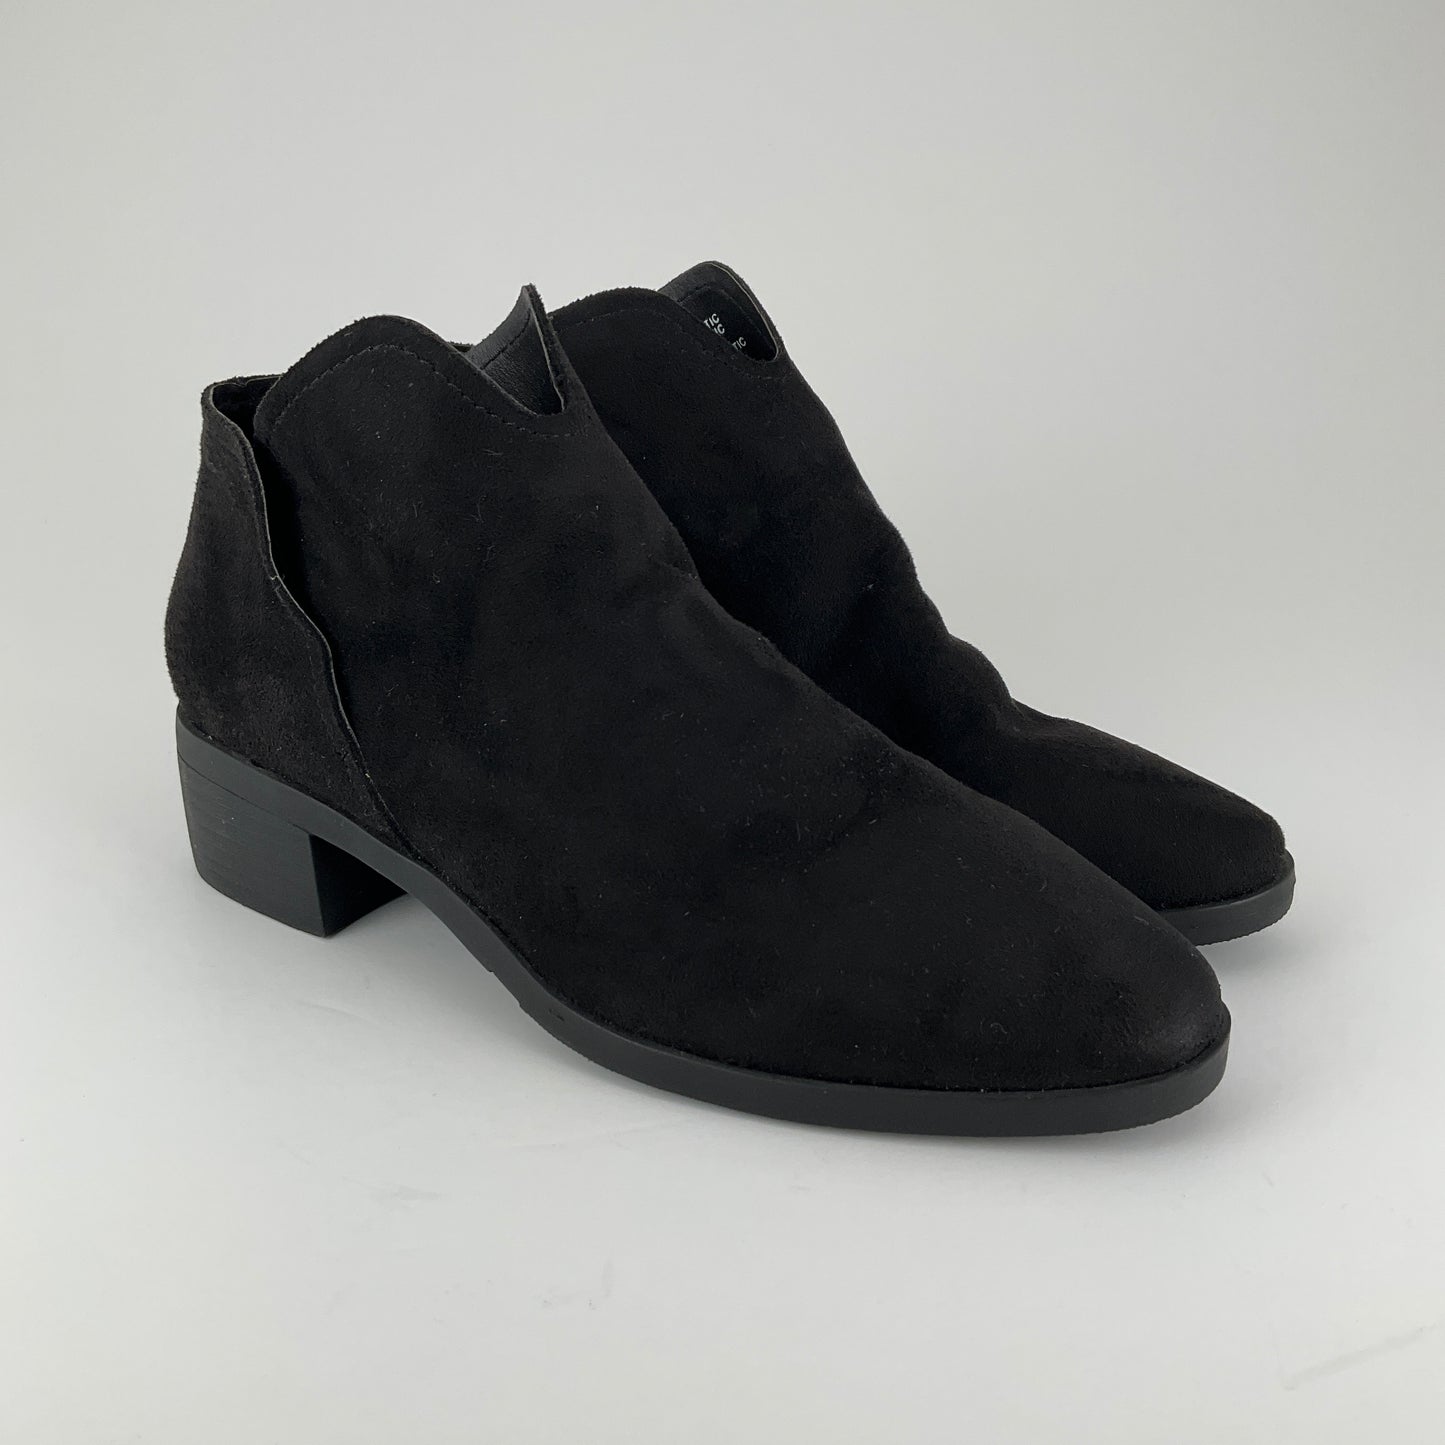 Celebrity -Ankle Boots - Size 6